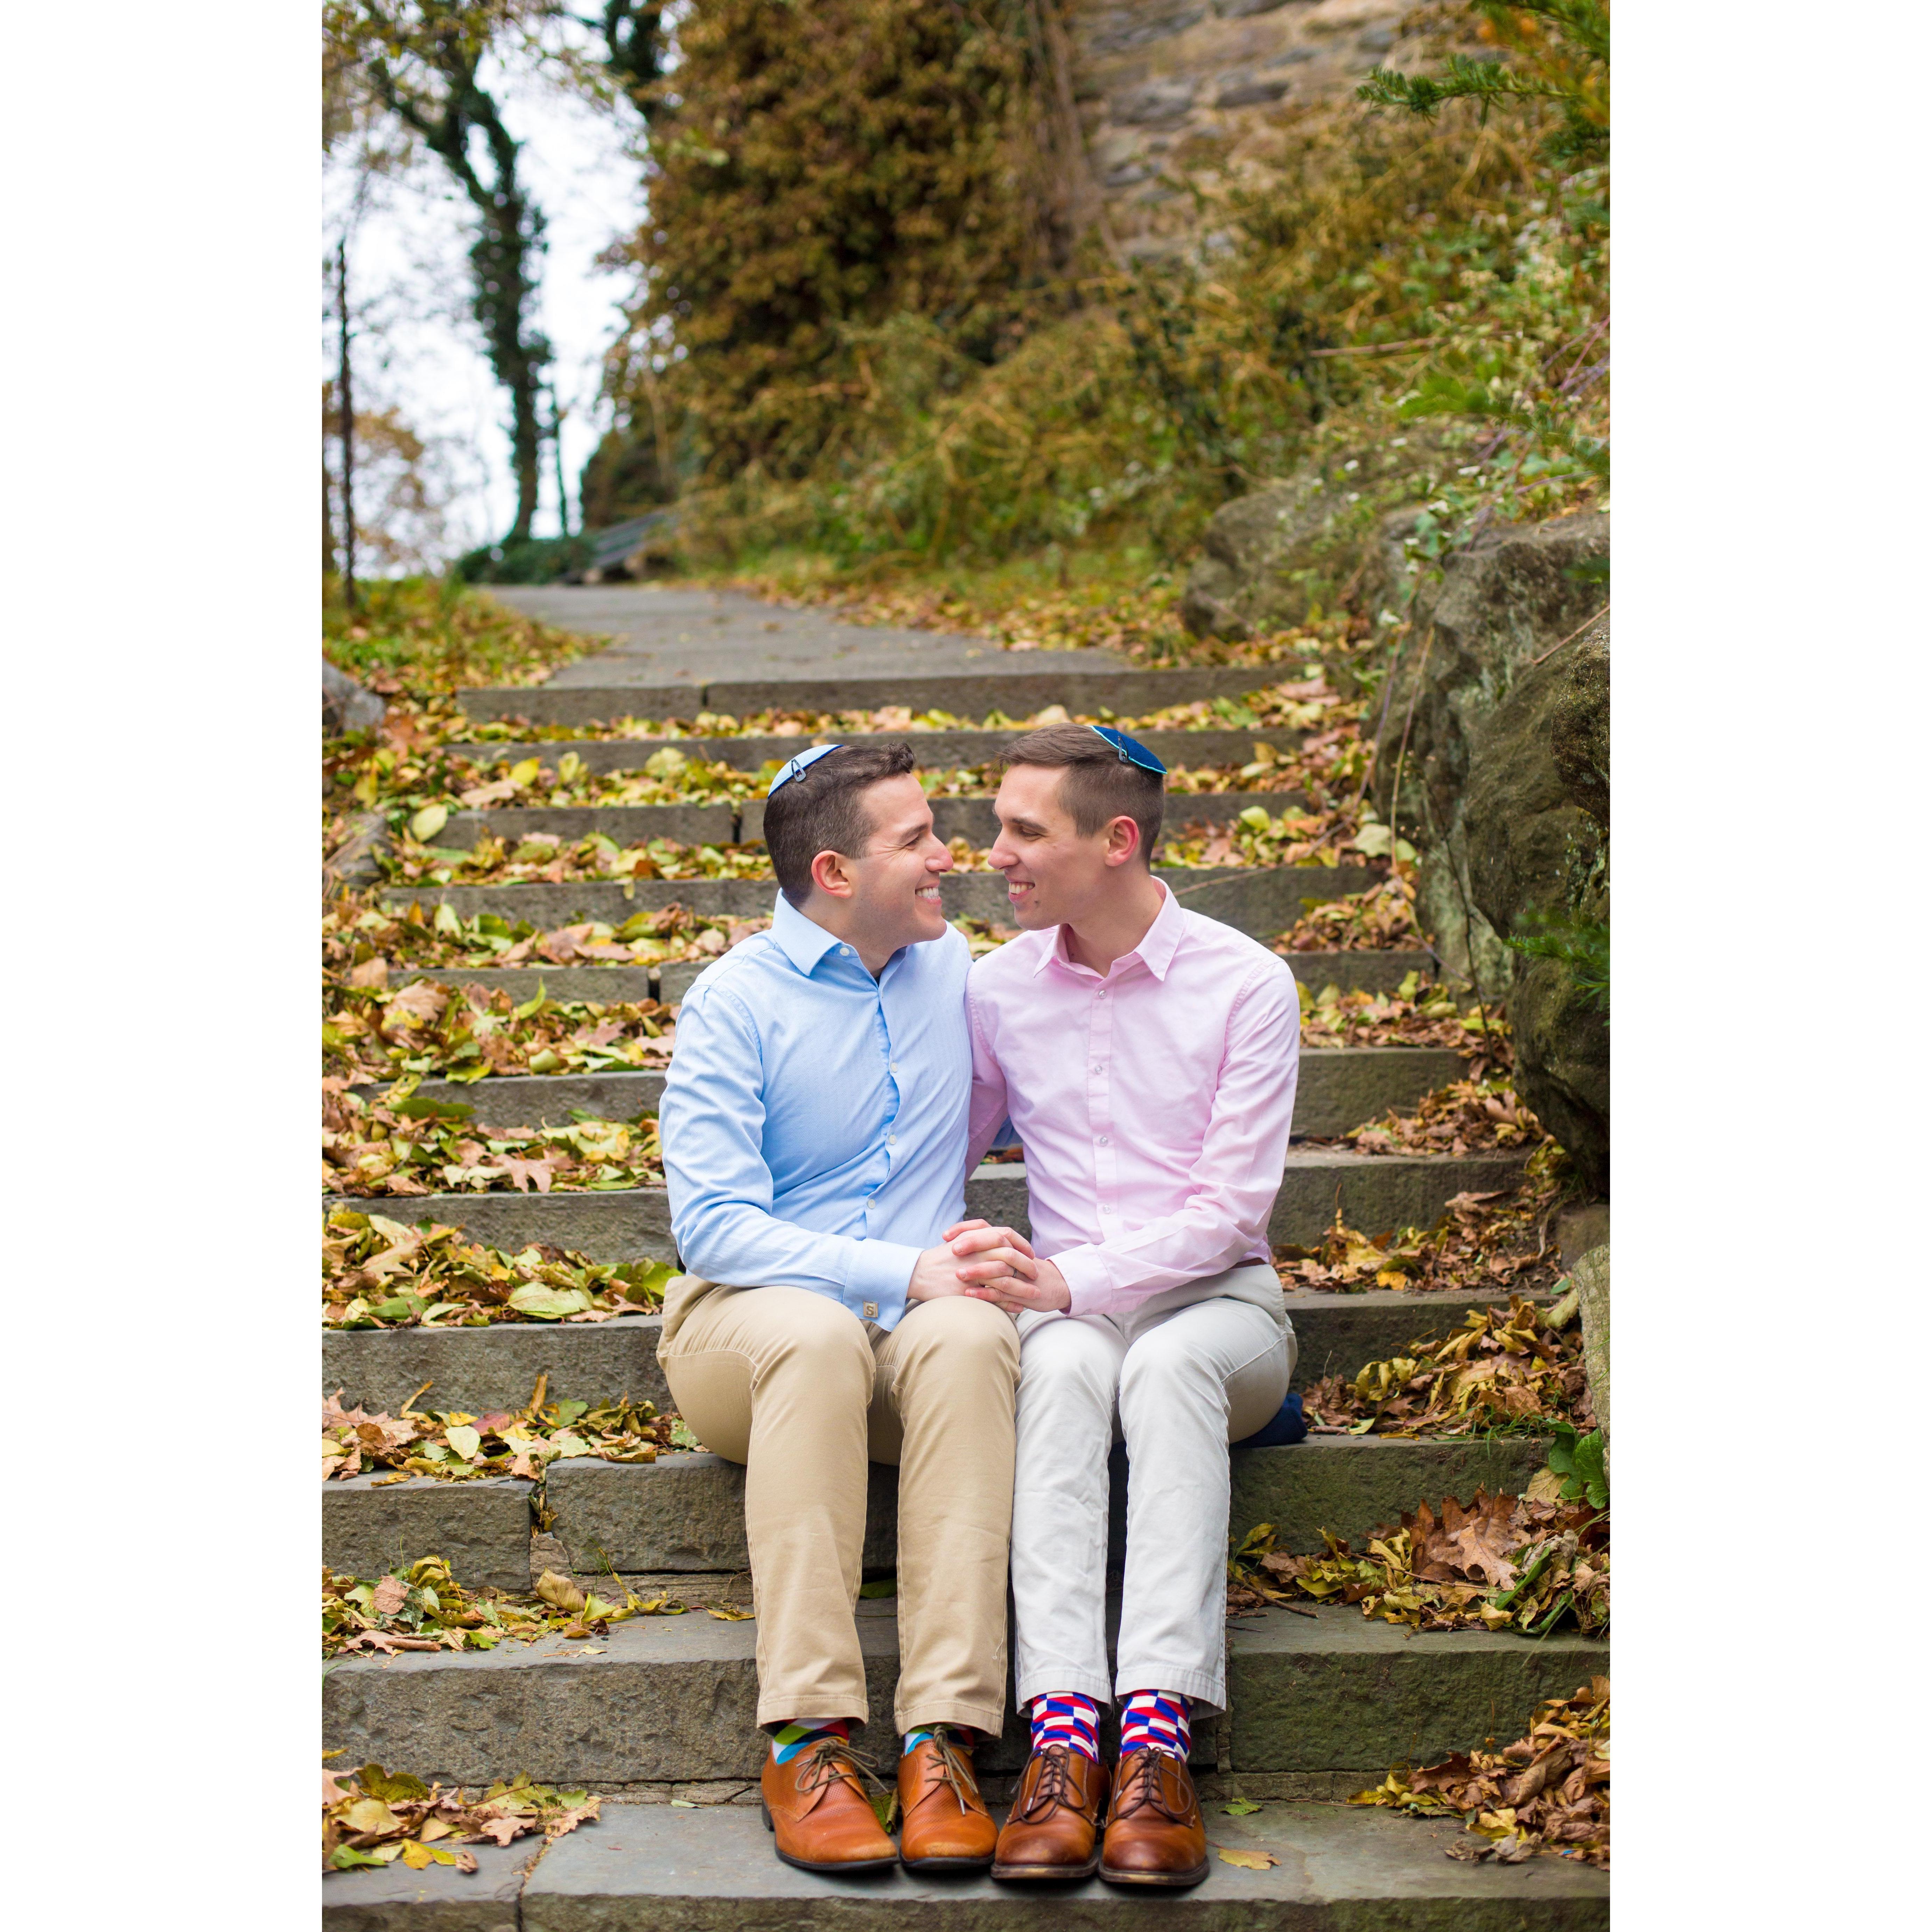 From our Engagement Shoot!!!

Thank you David Perlman Photography